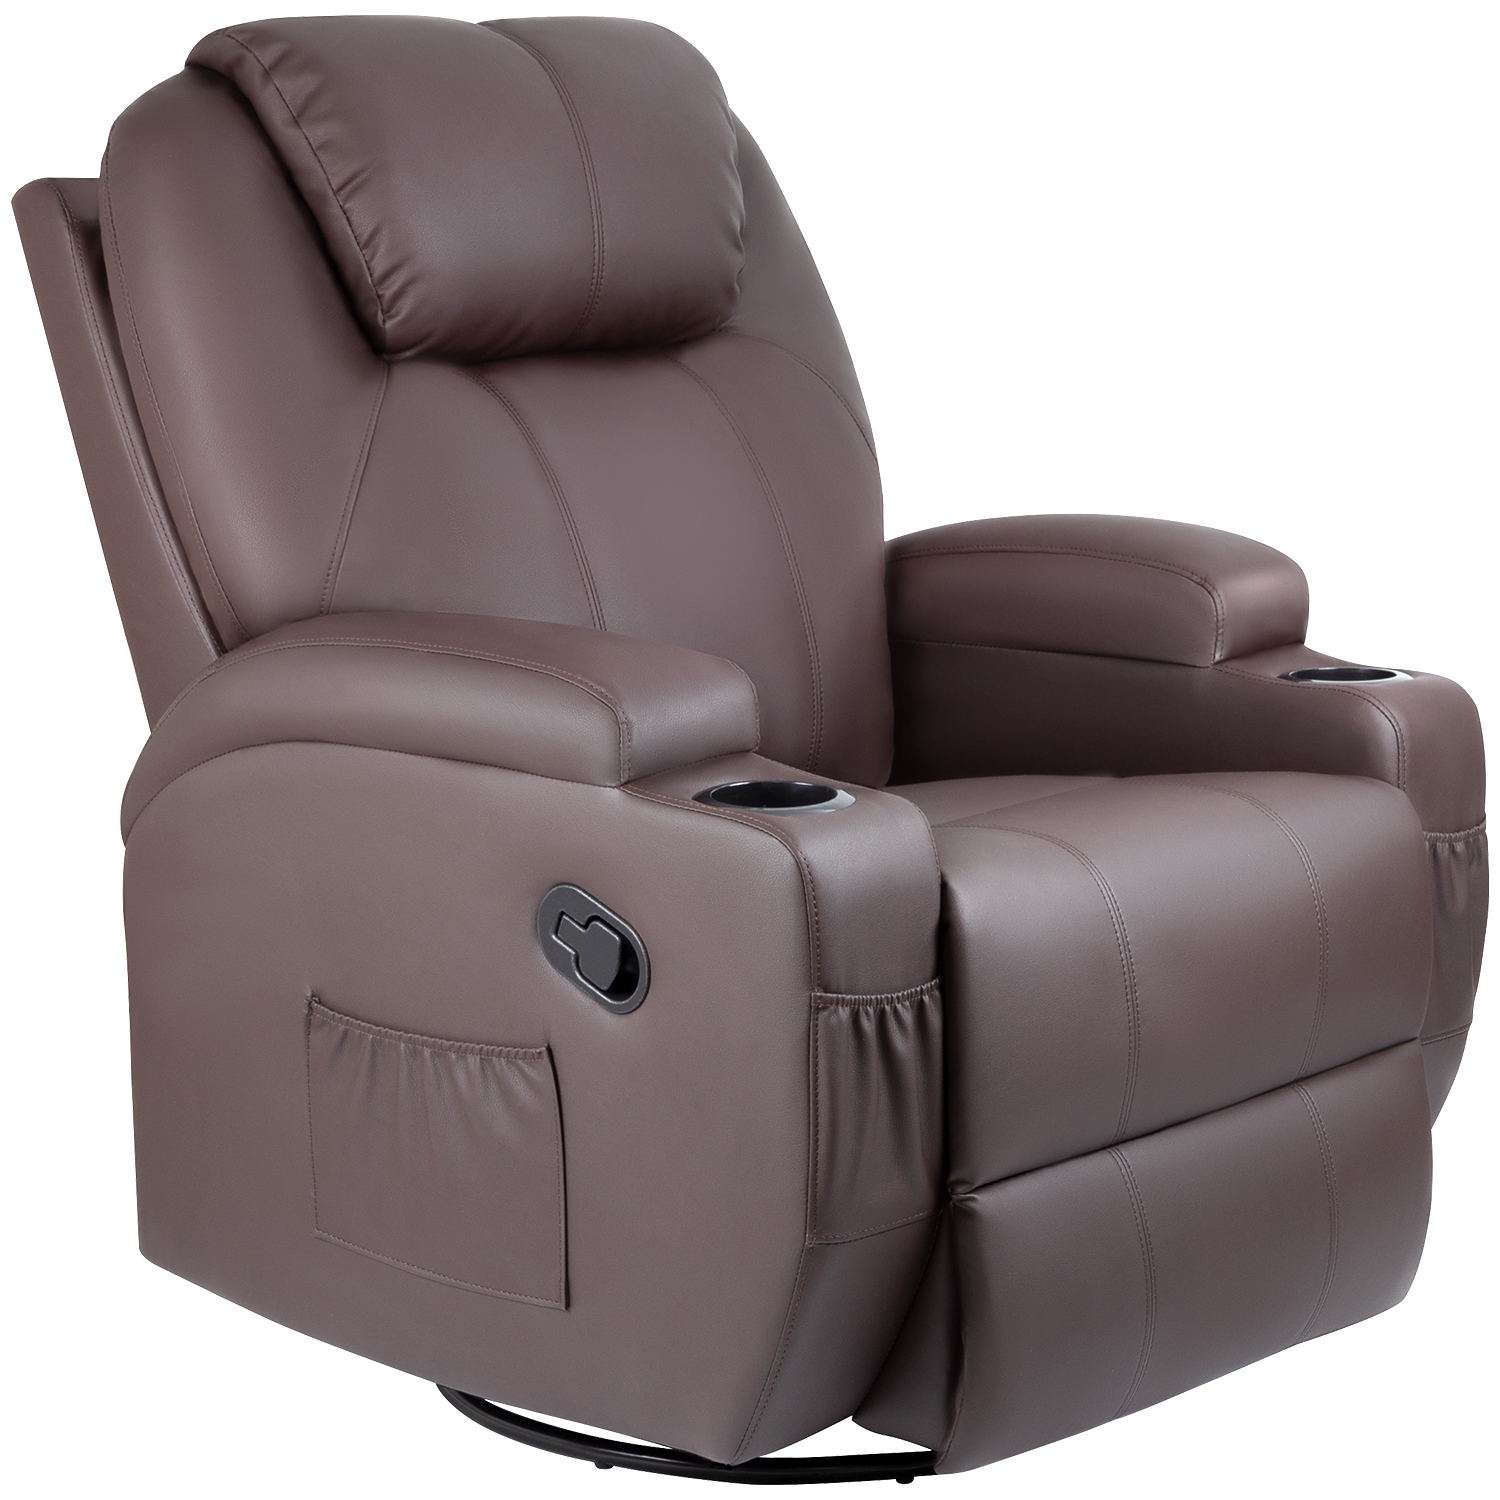 Walnew Swivel Rocker Recliner with Massage and Heat, Brown ...